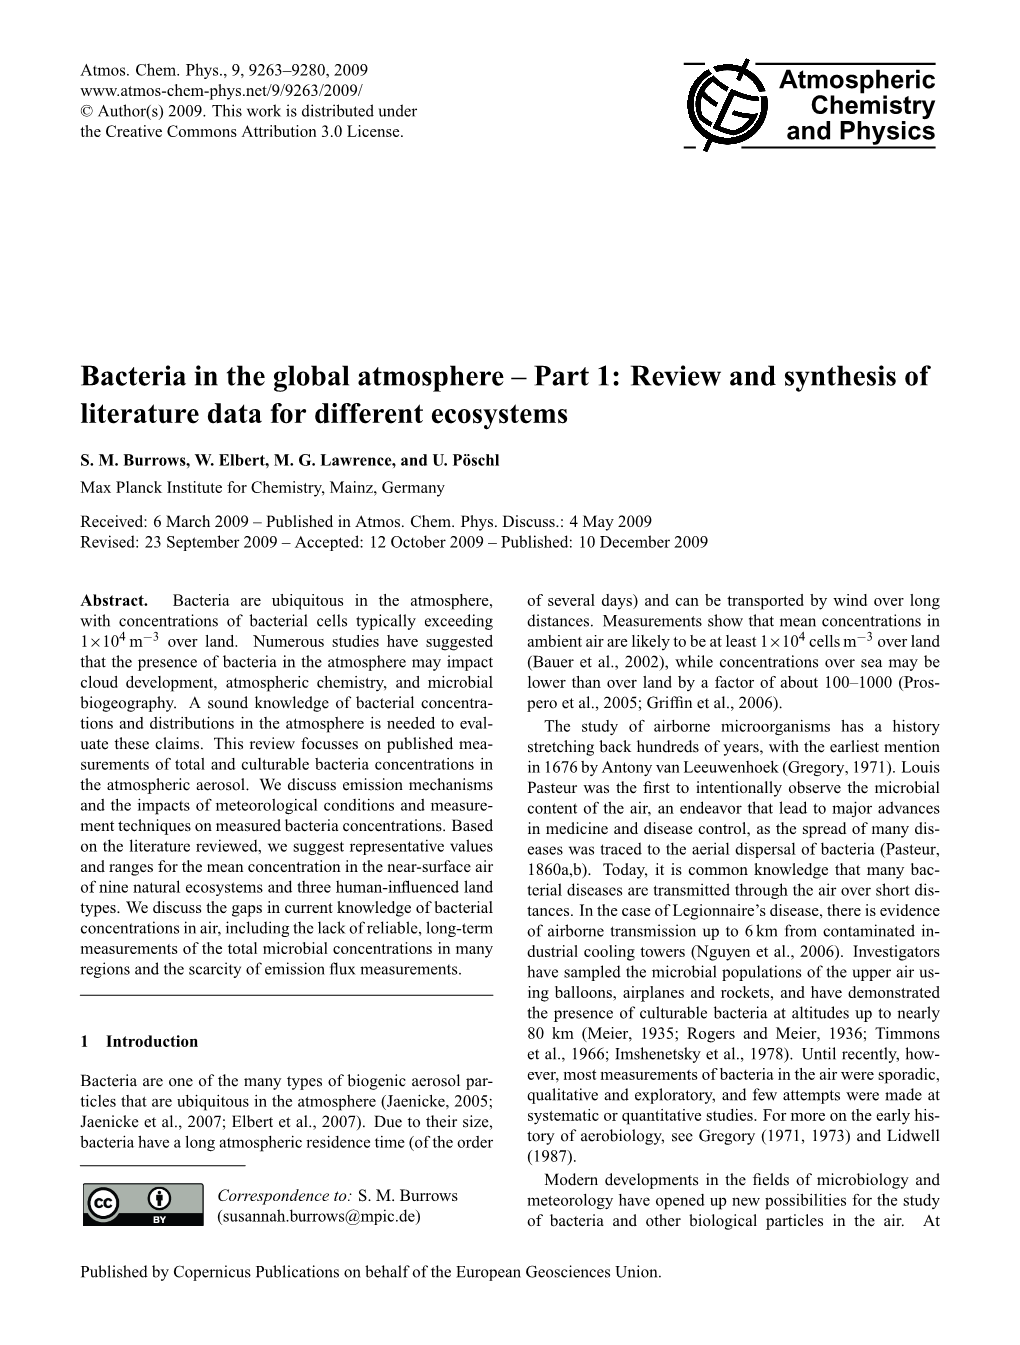 Bacteria in the Global Atmosphere – Part 1: Review and Synthesis of Literature Data for Different Ecosystems